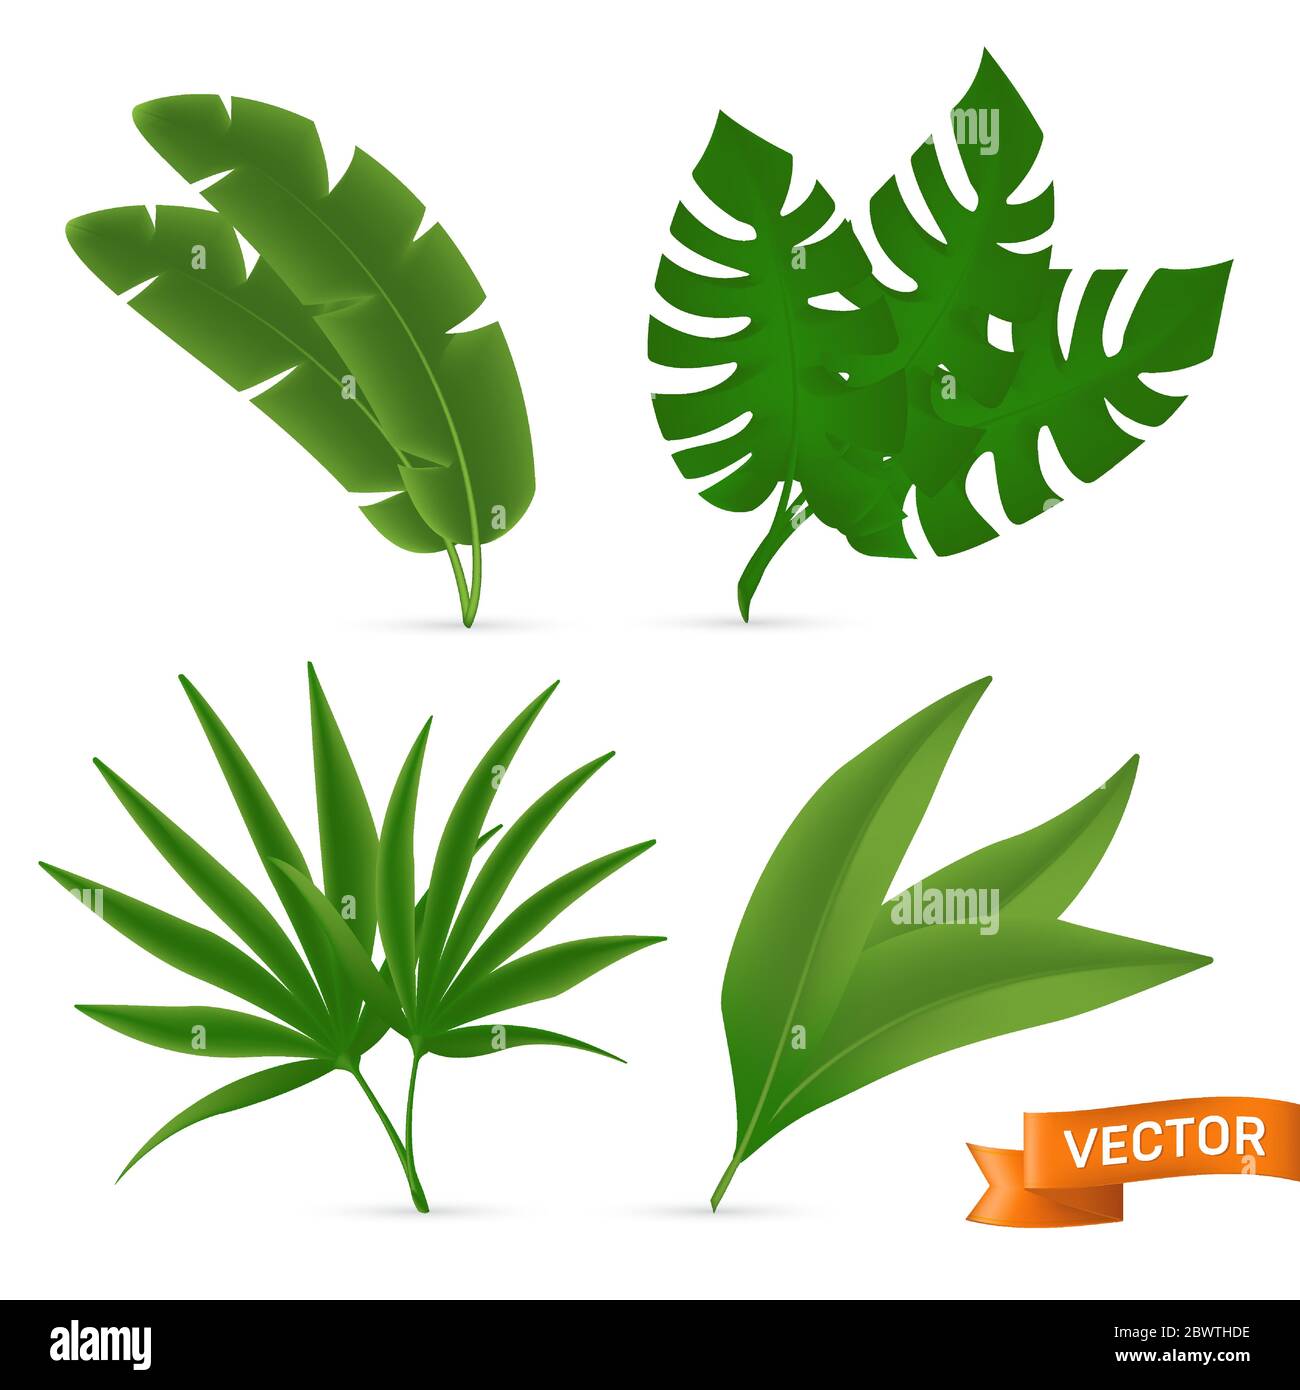 Exotic tropical palm leaves set. Vector illustration of various green foliage isolated on white background Stock Vector